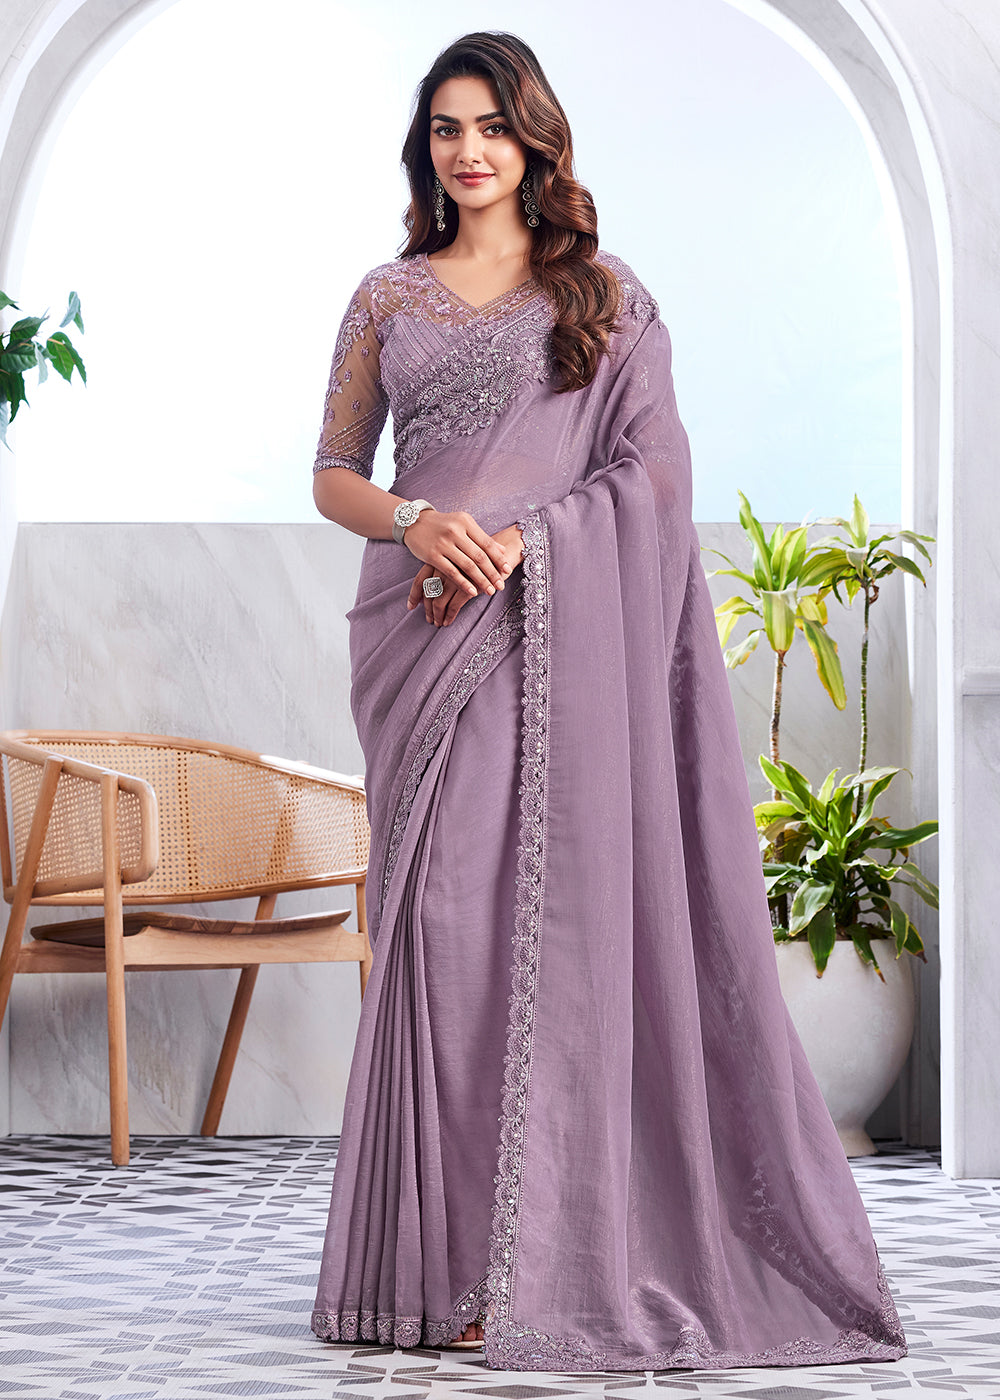 Buy Now Lovely Light Mauve Silk Embroidered Designer Saree Online in USA, UK, Canada & Worldwide at Empress Clothing. 